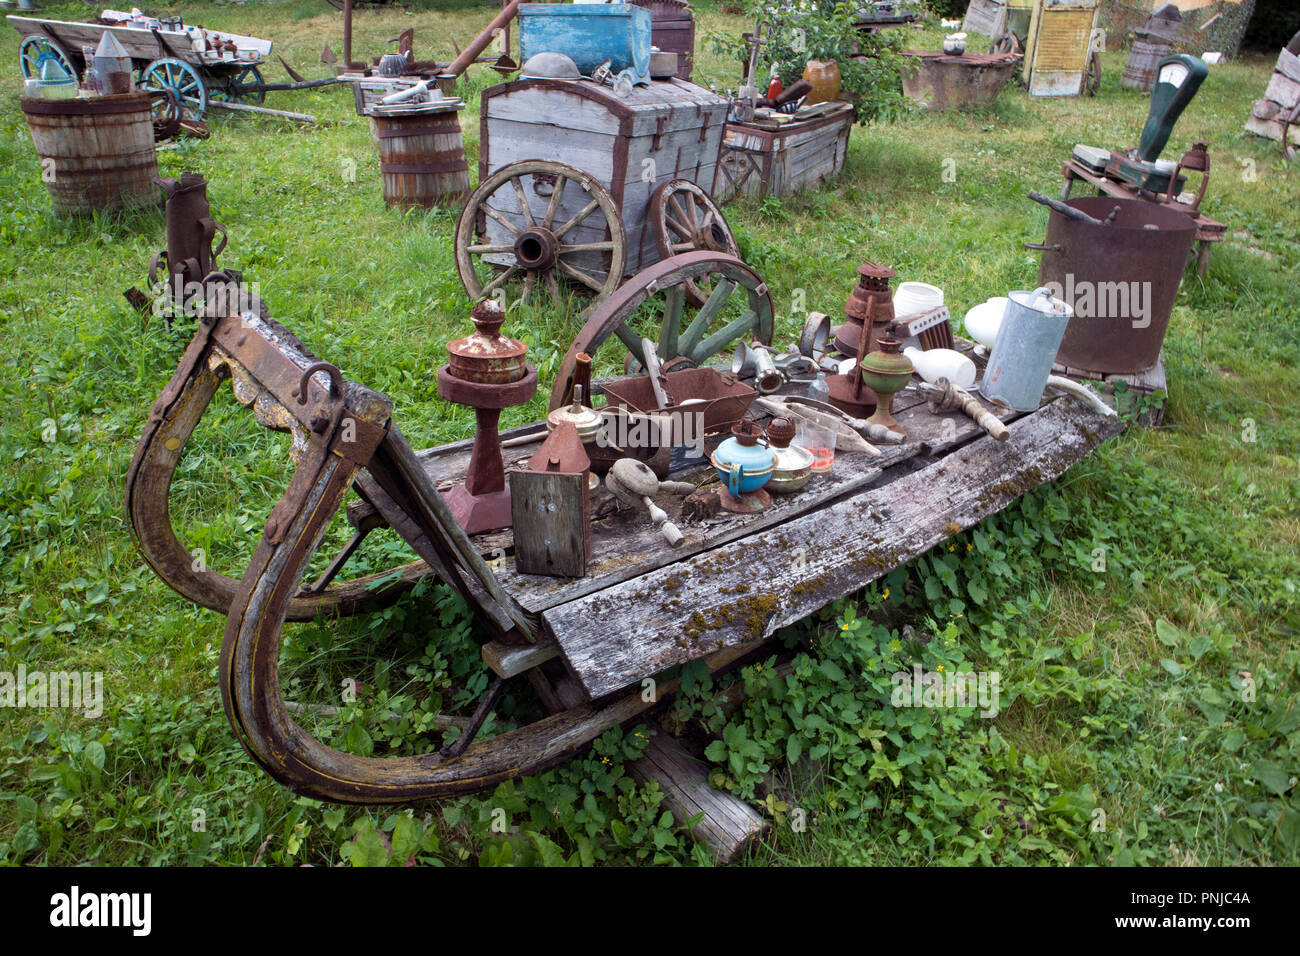 Open air museum of old unnecessary things, antique unwanted junk in old open sleigh Stock Photo